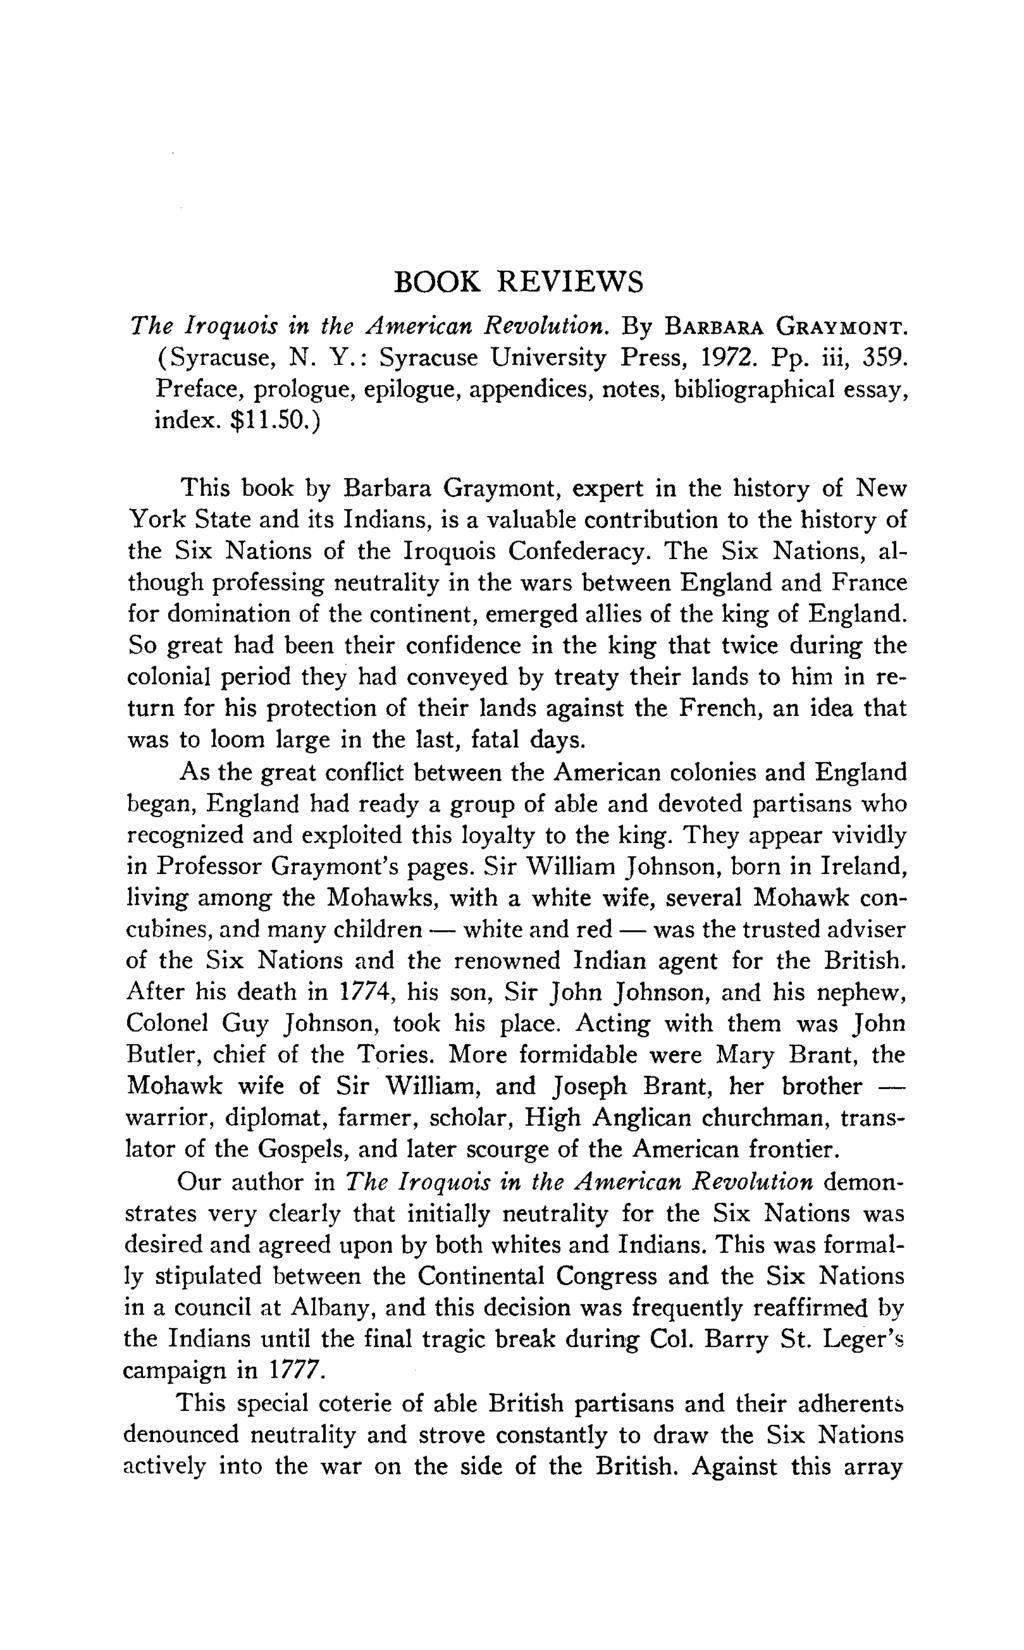 BOOK REVIEWS The Iroquois in the American Revolution. By Barbara Graymont. (Syracuse, N. Y.: Syracuse University Press, 1972. Pp. iii,359.